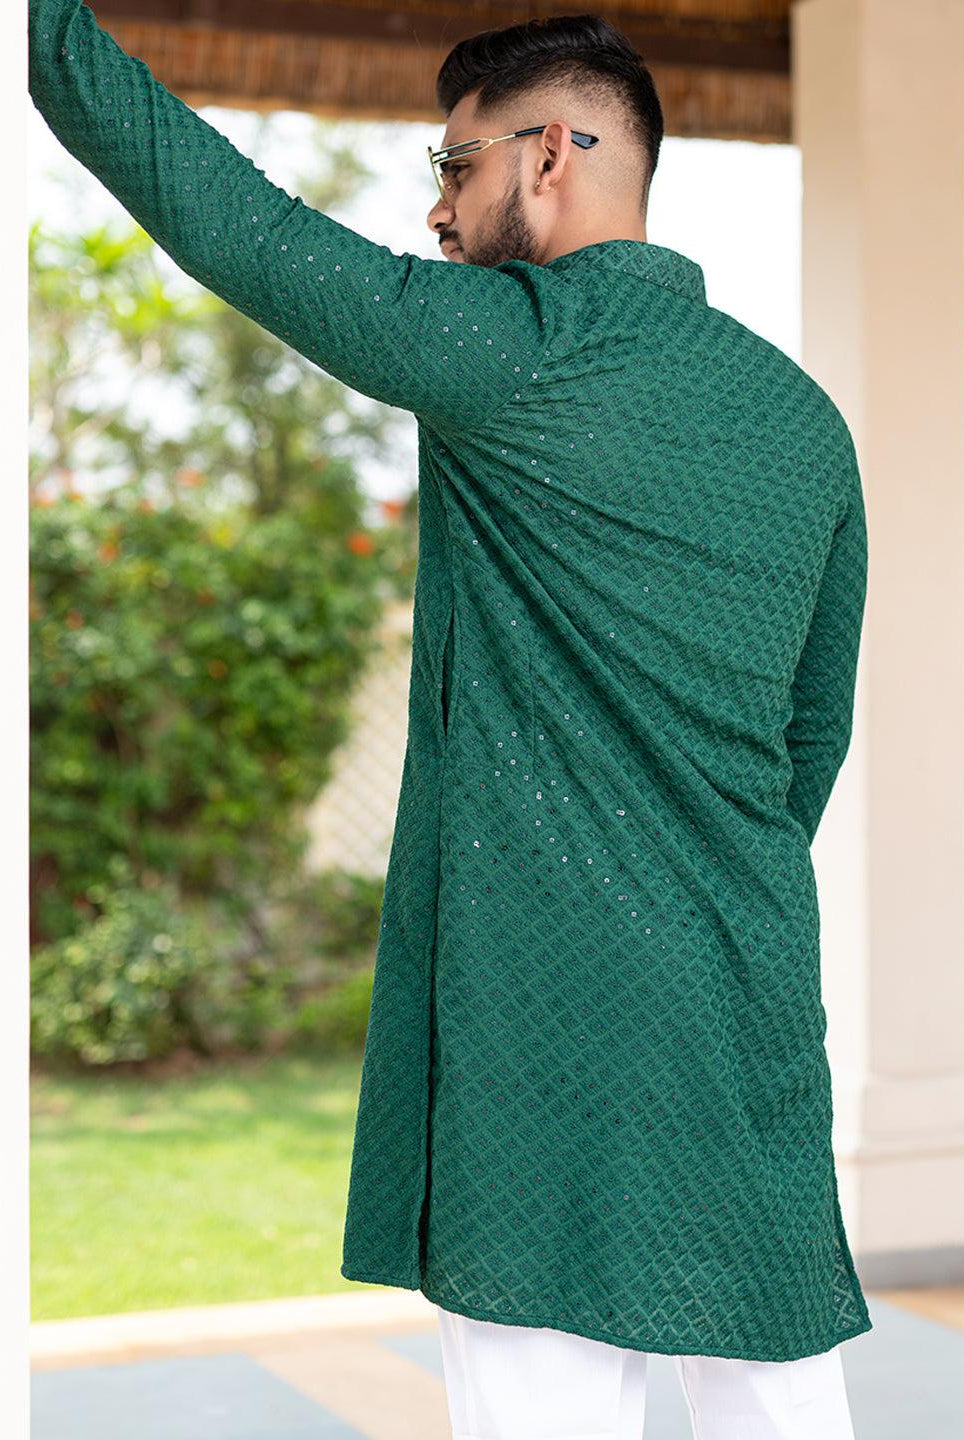 Buy Green Floral Embroidered Cotton Mens Kurta Online